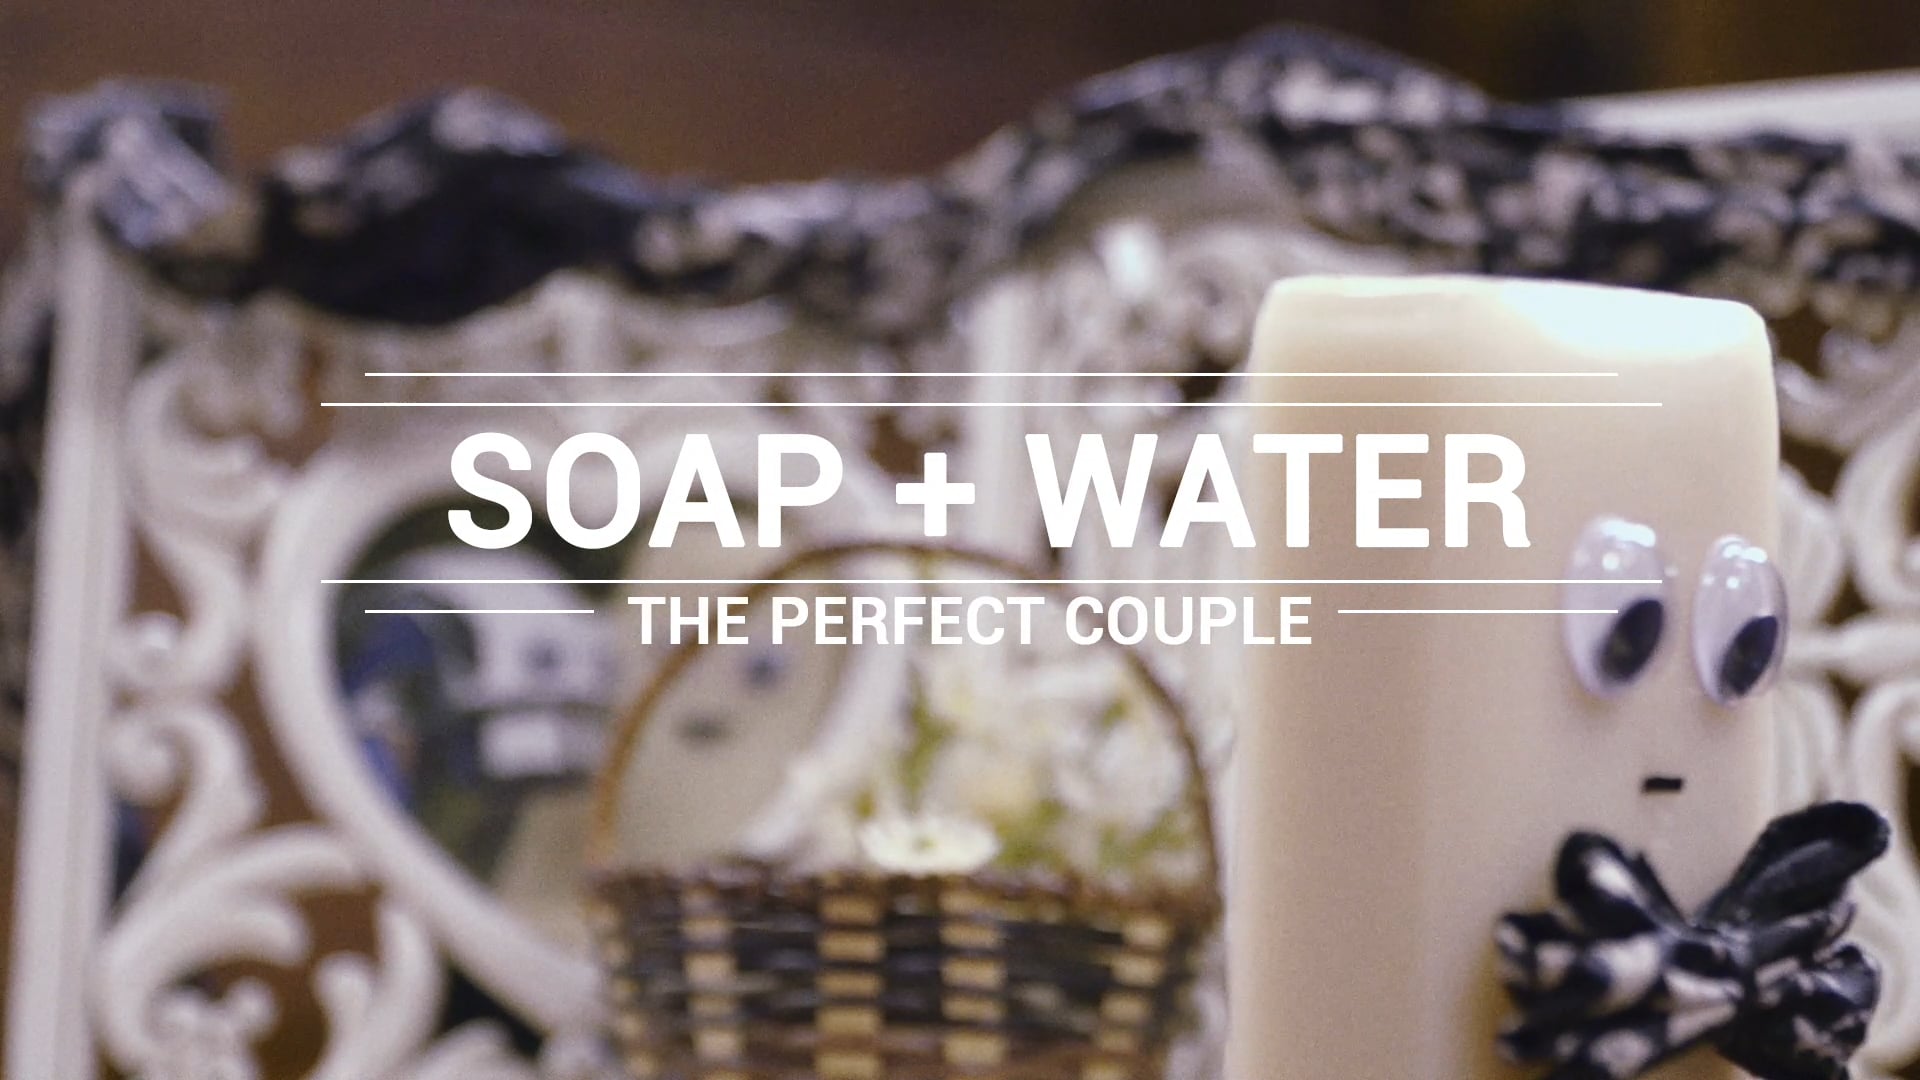 Soap and Water: The Perfect Couple (Unicef)